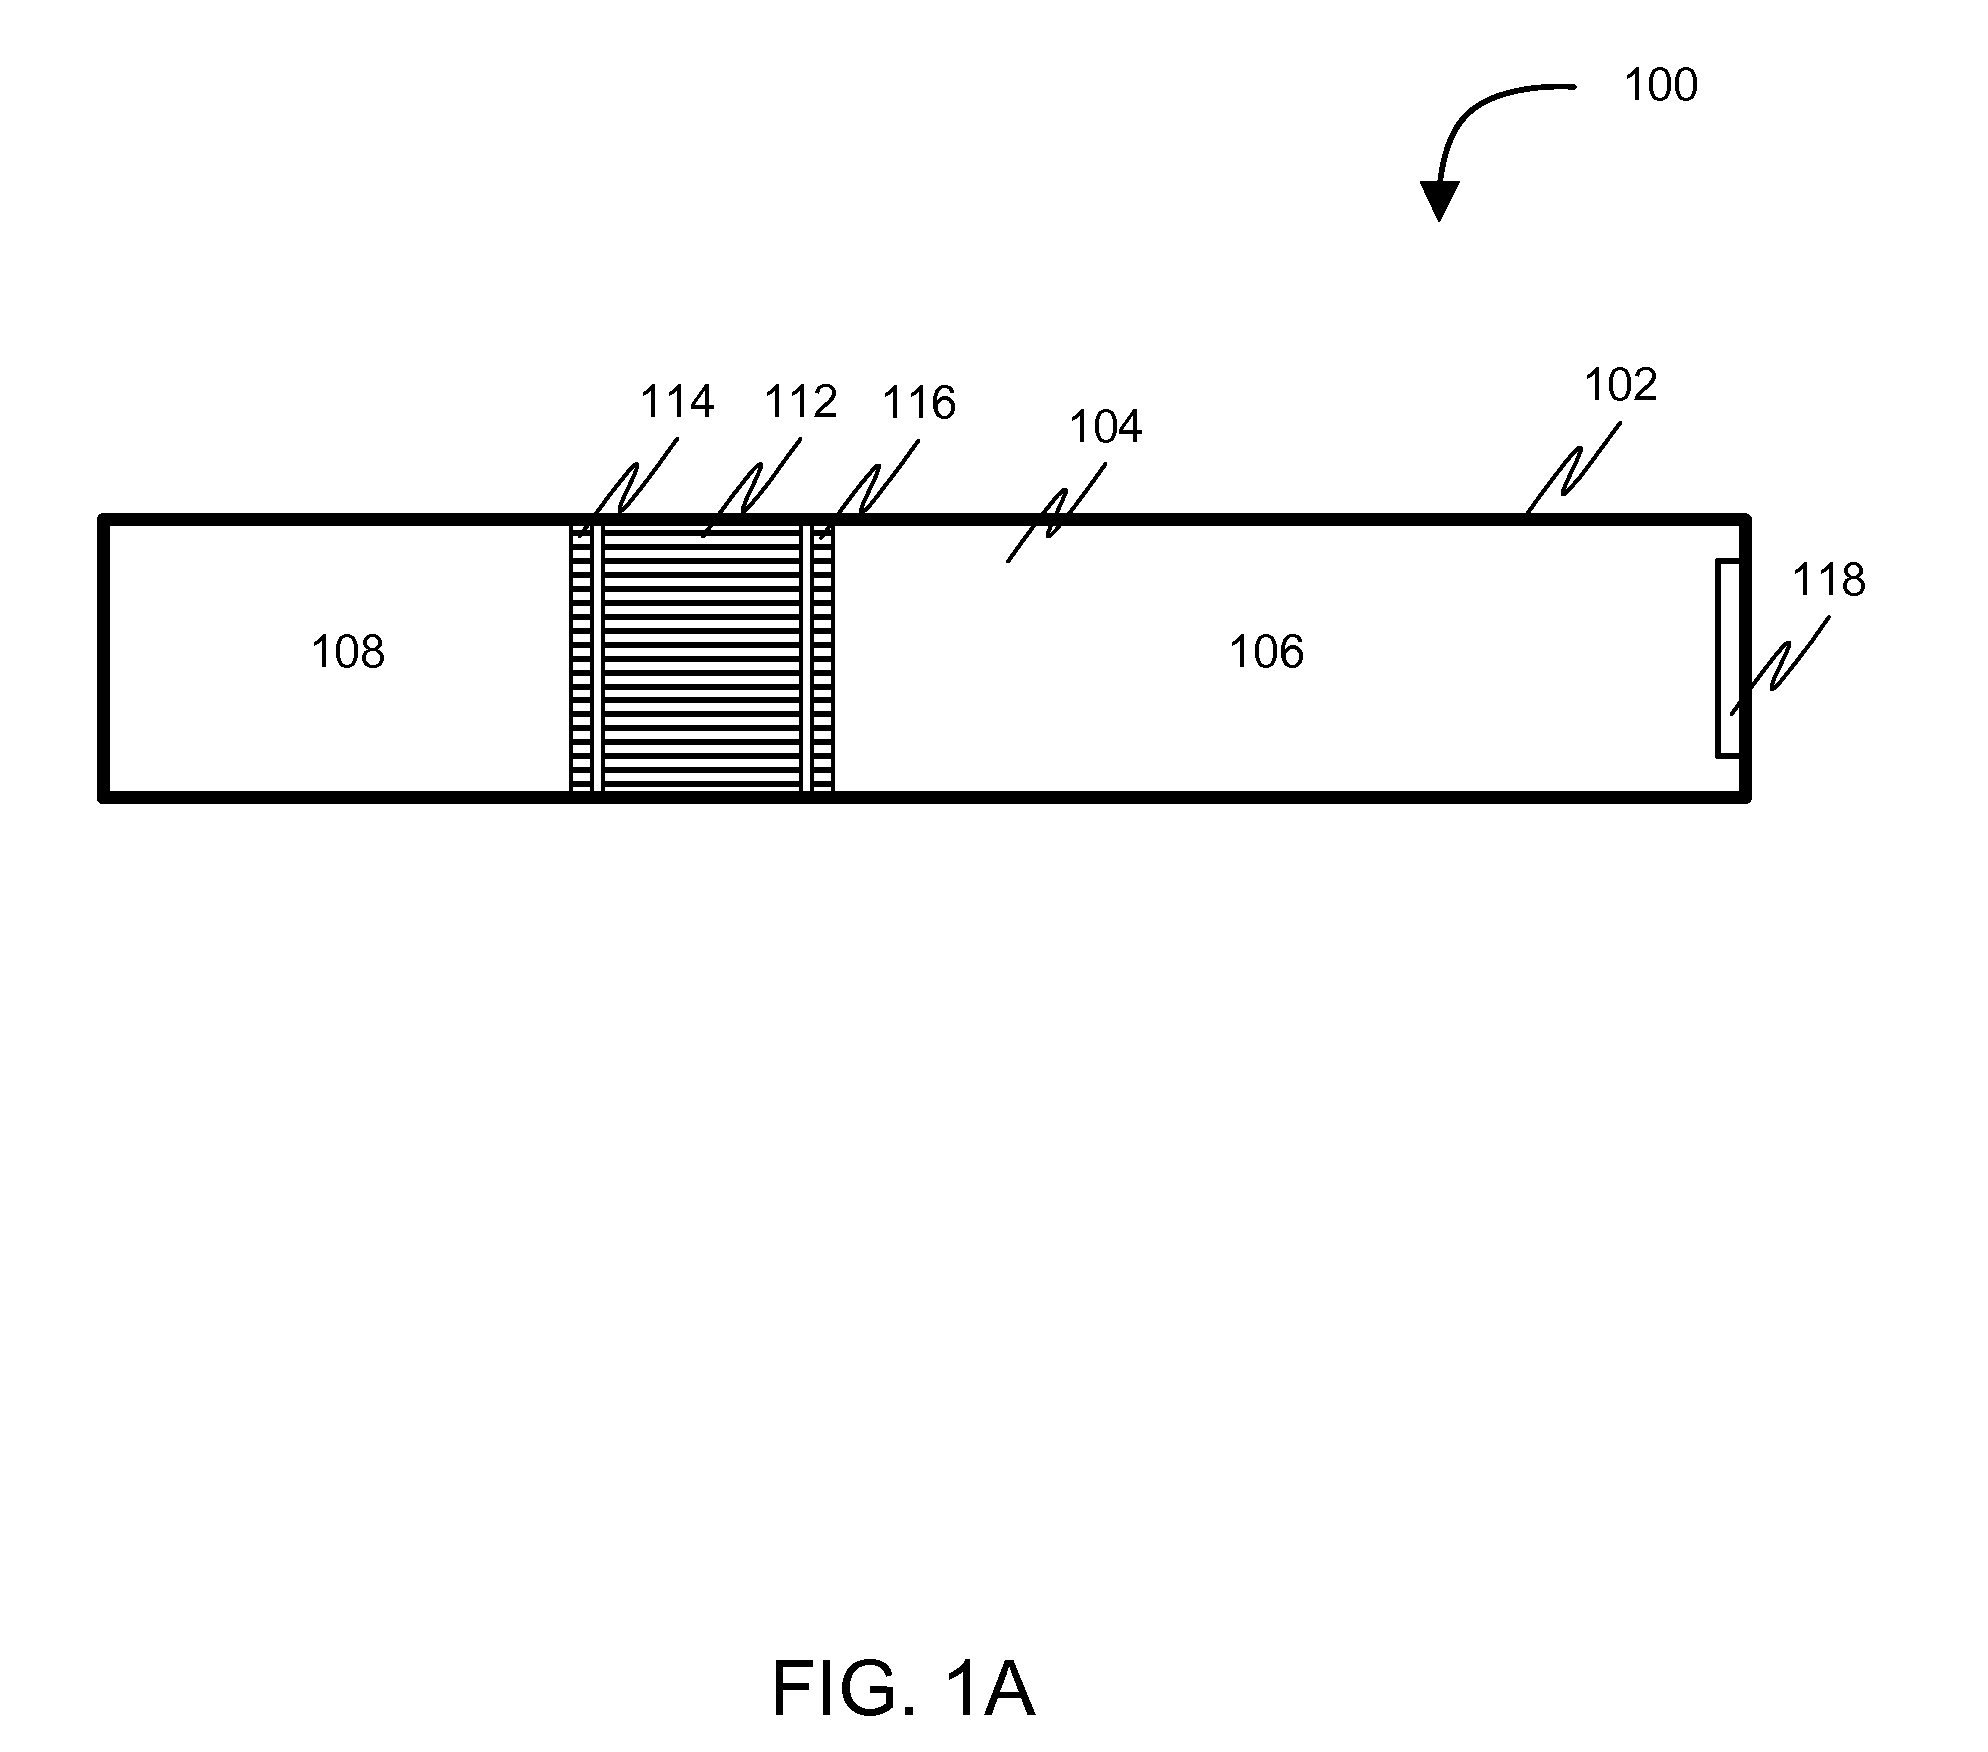 Standing wave thermoacoustic piezoelectric refrigerator